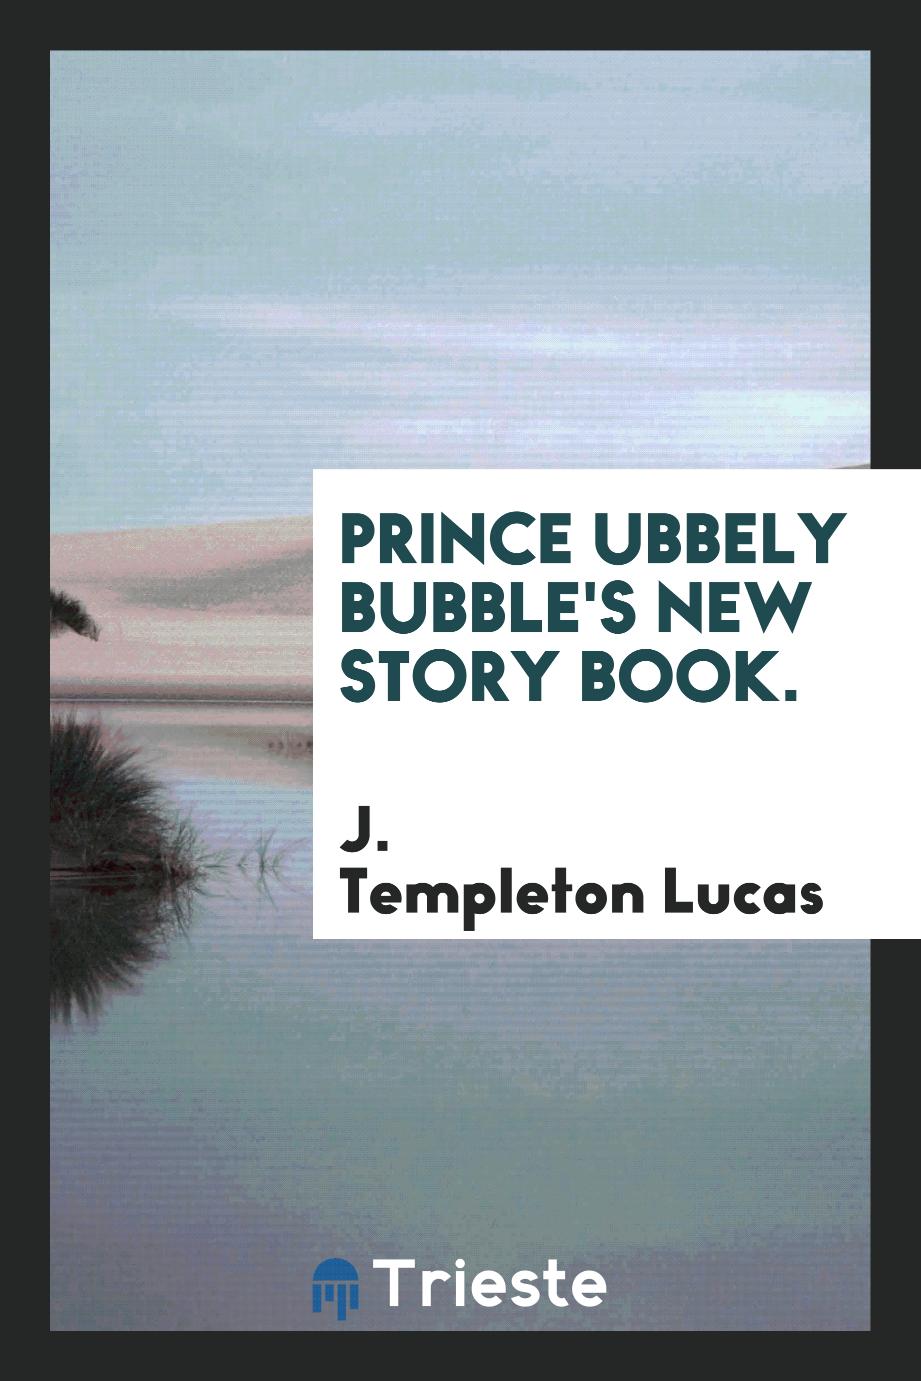 Prince Ubbely Bubble's new story book.